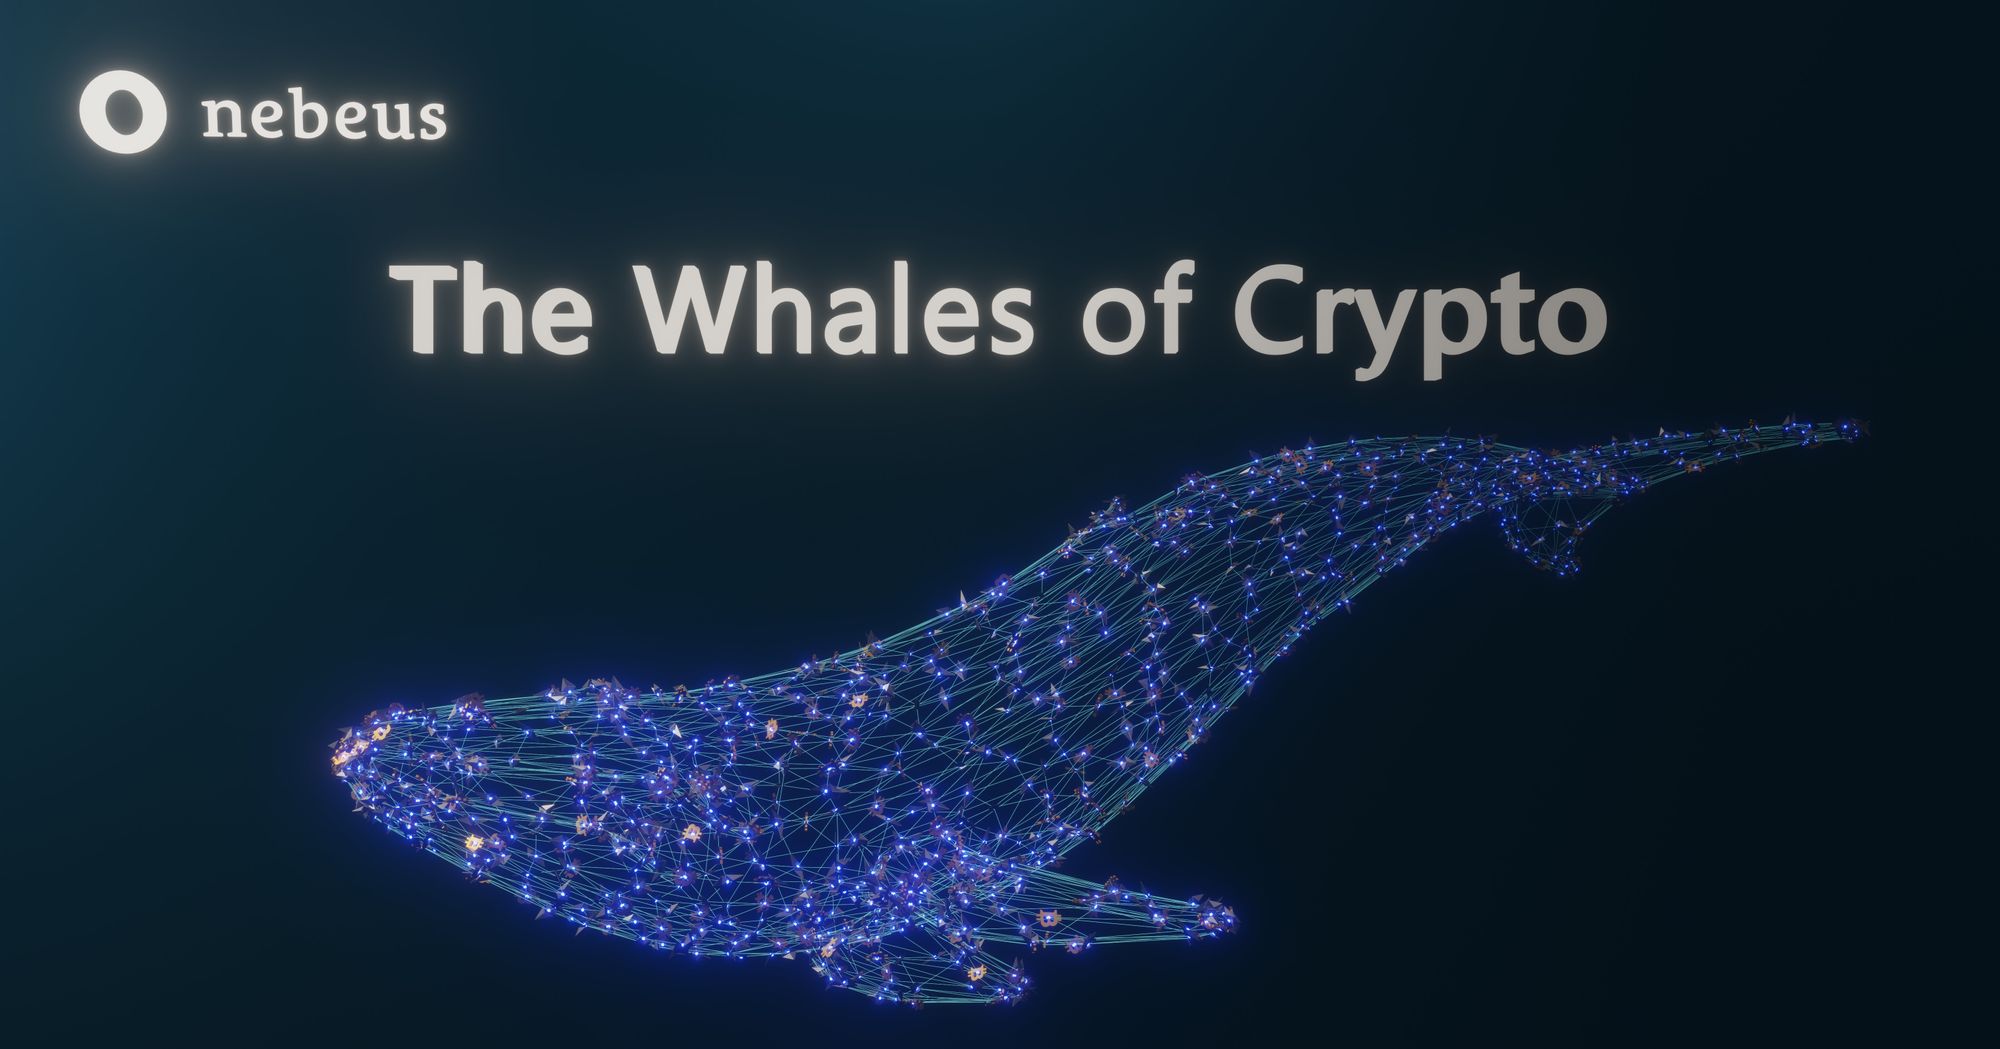 The Whales of Crypto - Top 10 Bitcoin Holders